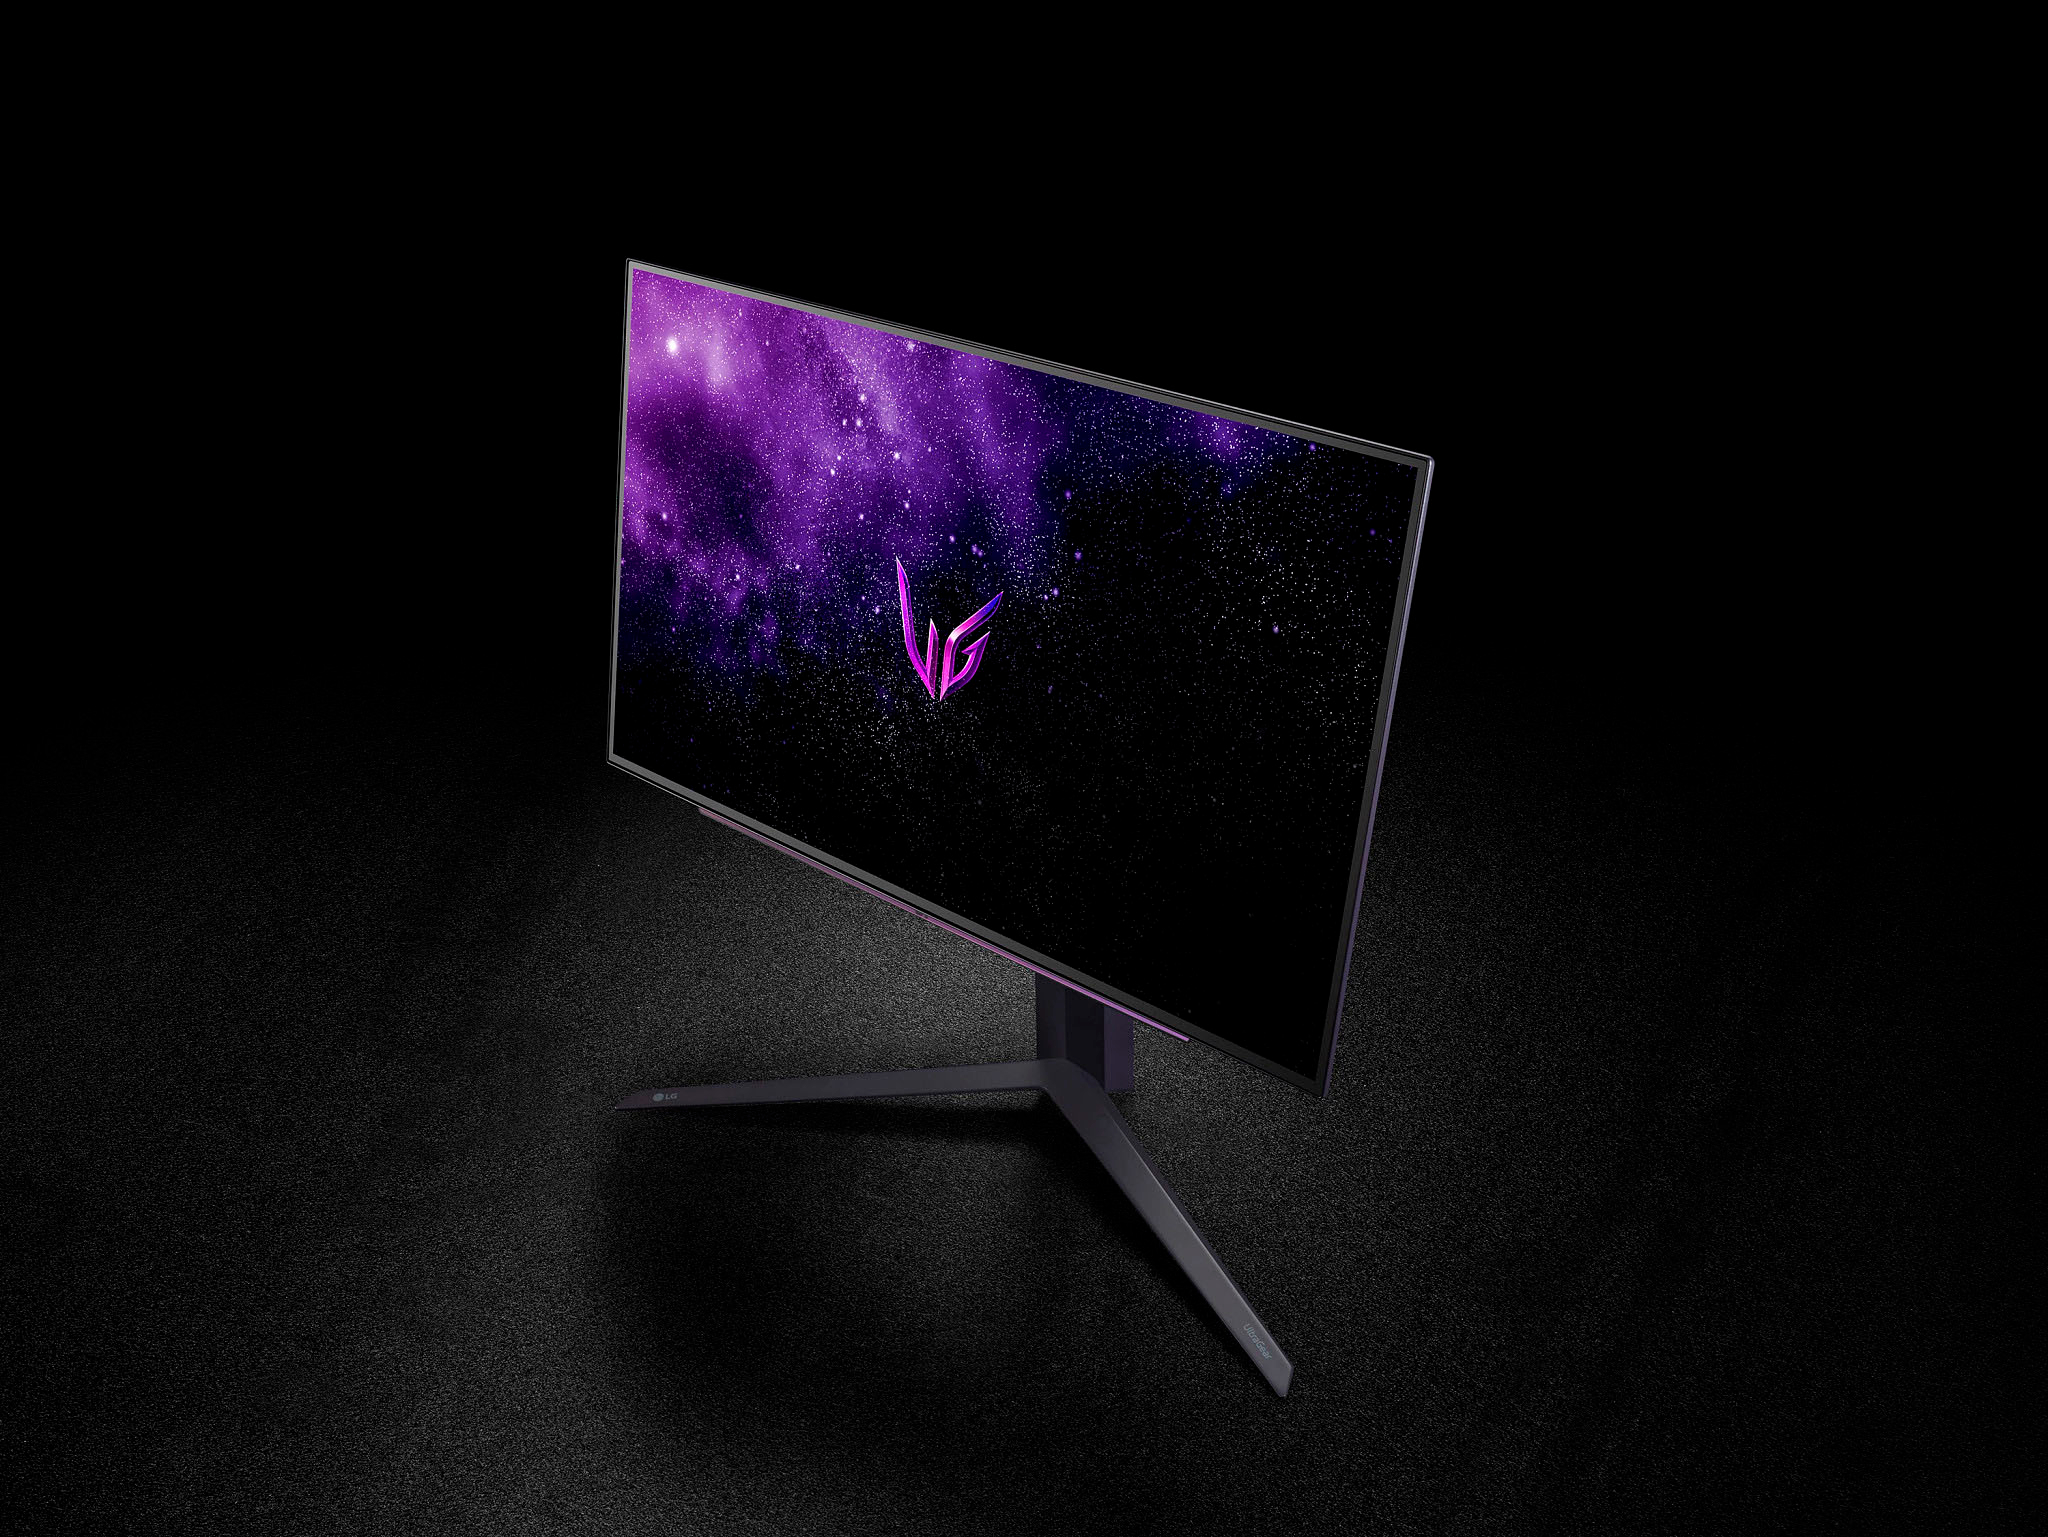 New LG UltraGear Gaming Monitors Play in OLED at 240Hz - CNET